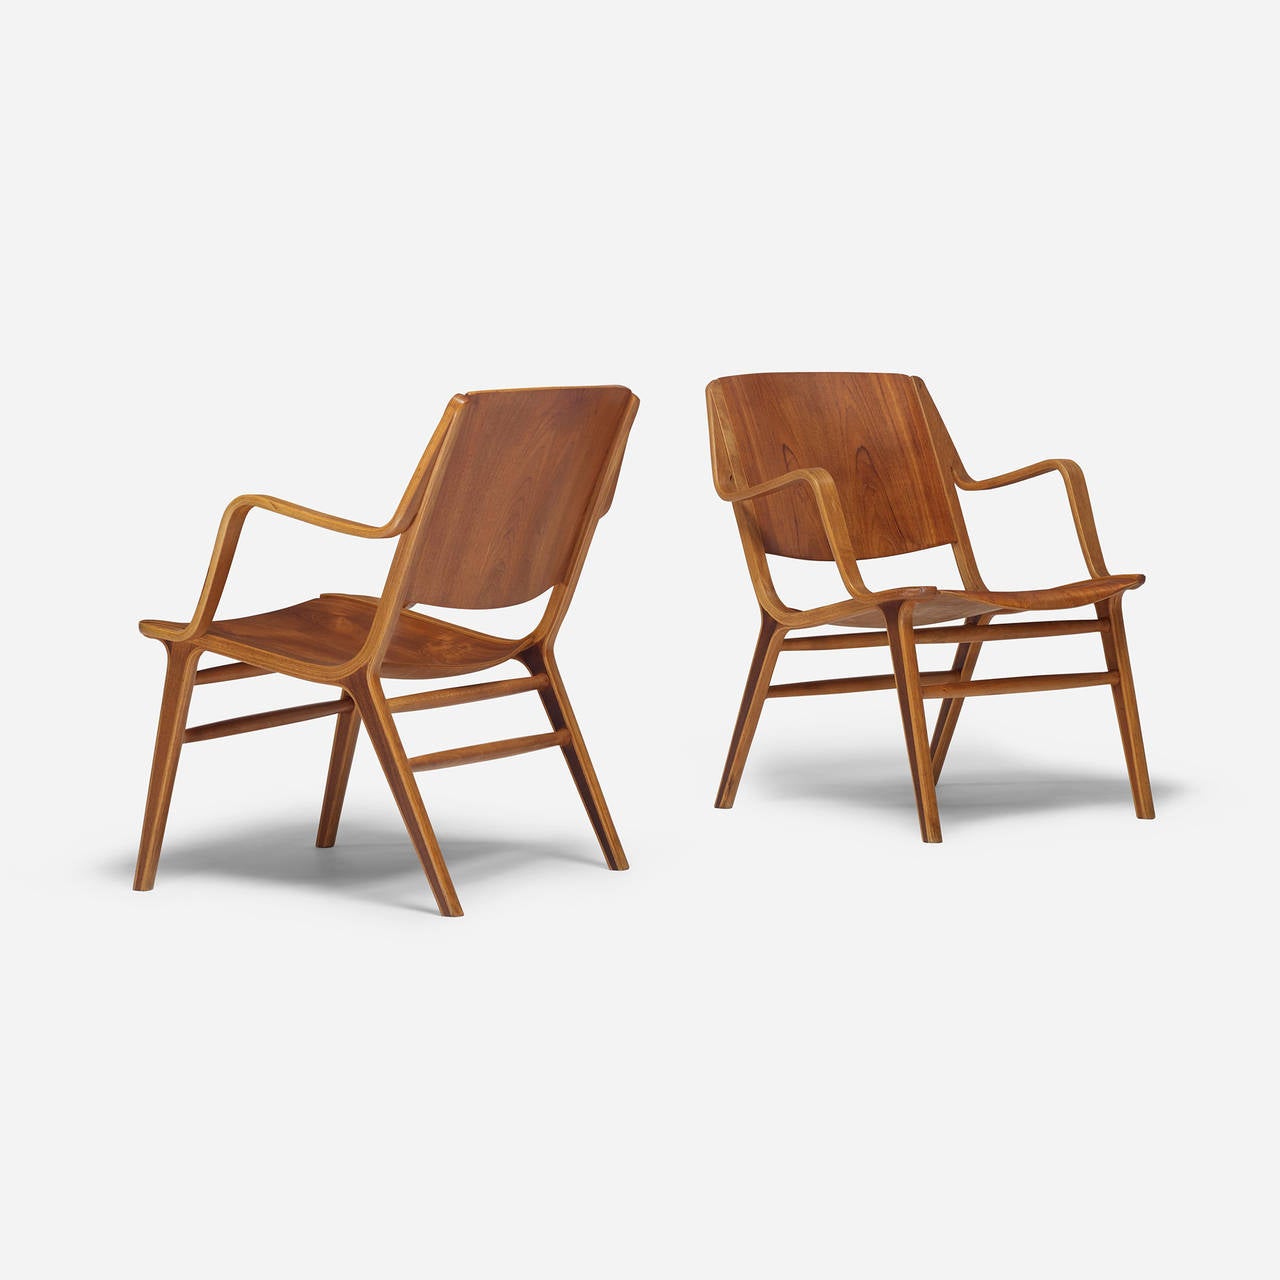 AX chairs model 6020, pair by Peter Hvidt & Orla Mølgaard Nielsen for Fritz Hansen.

Signed with stamped manufacturer's mark to underside of each: [FH].